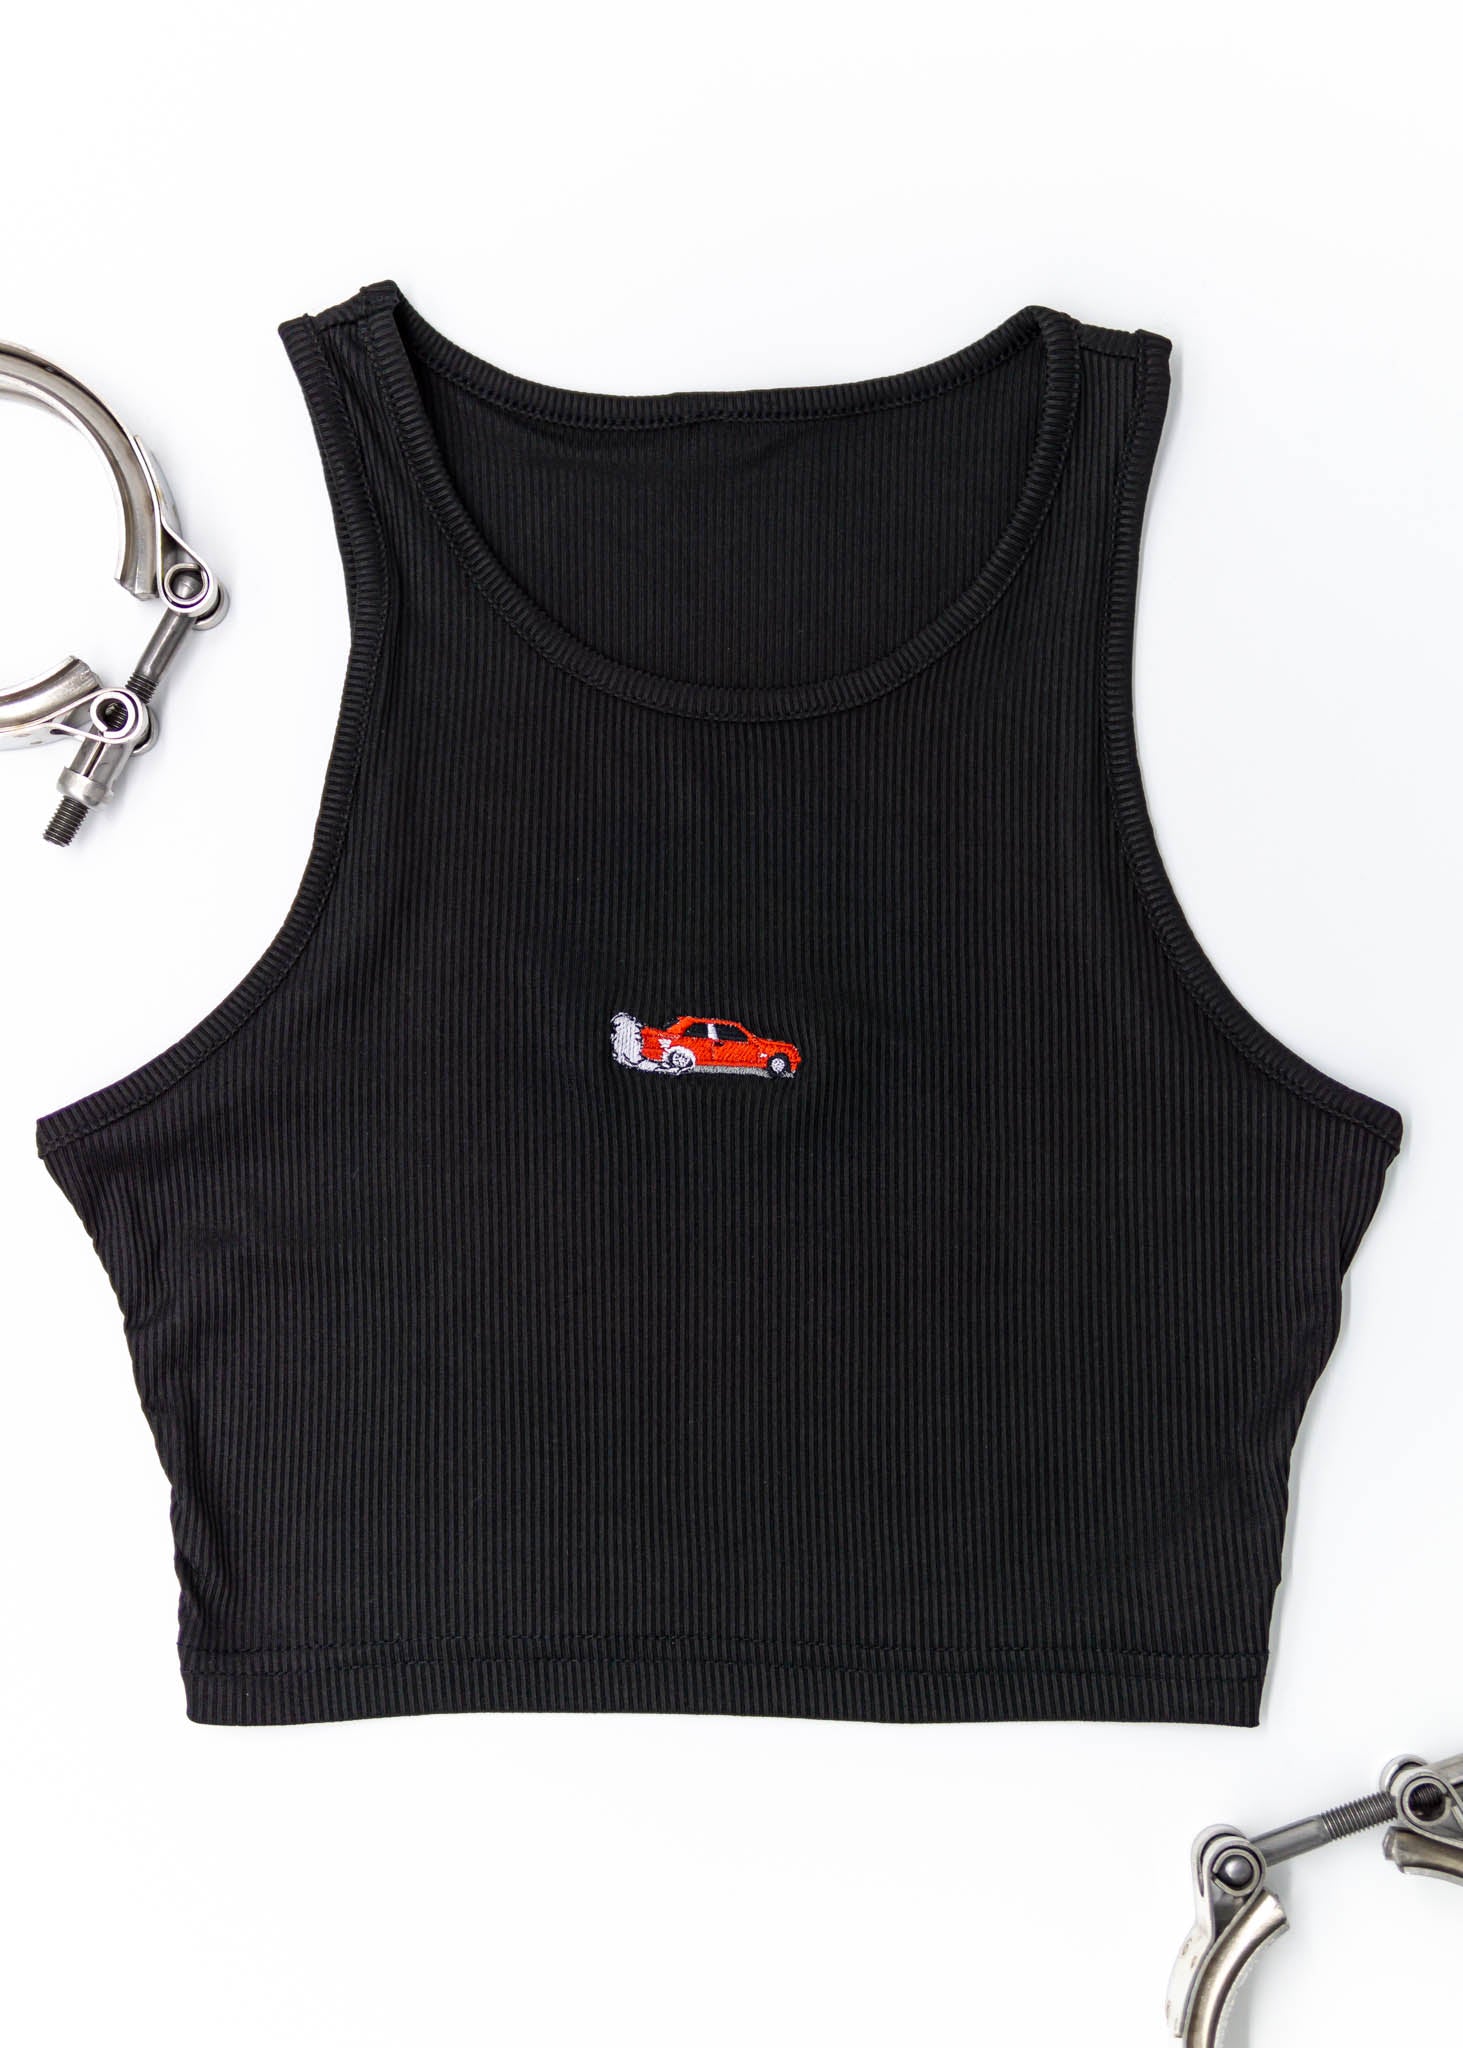 A black BMW Bimmer crop top for women and plus size women. Photo is a front view of the shirt with an embroidered Red E30 M3 doing a burnout. Fabric composition is a polyester, and elastine mix. The material is very stretchy, comfortable, and non-transparent. The style of this shirt is sleeveless, tank top straps, with crewneck neckline.